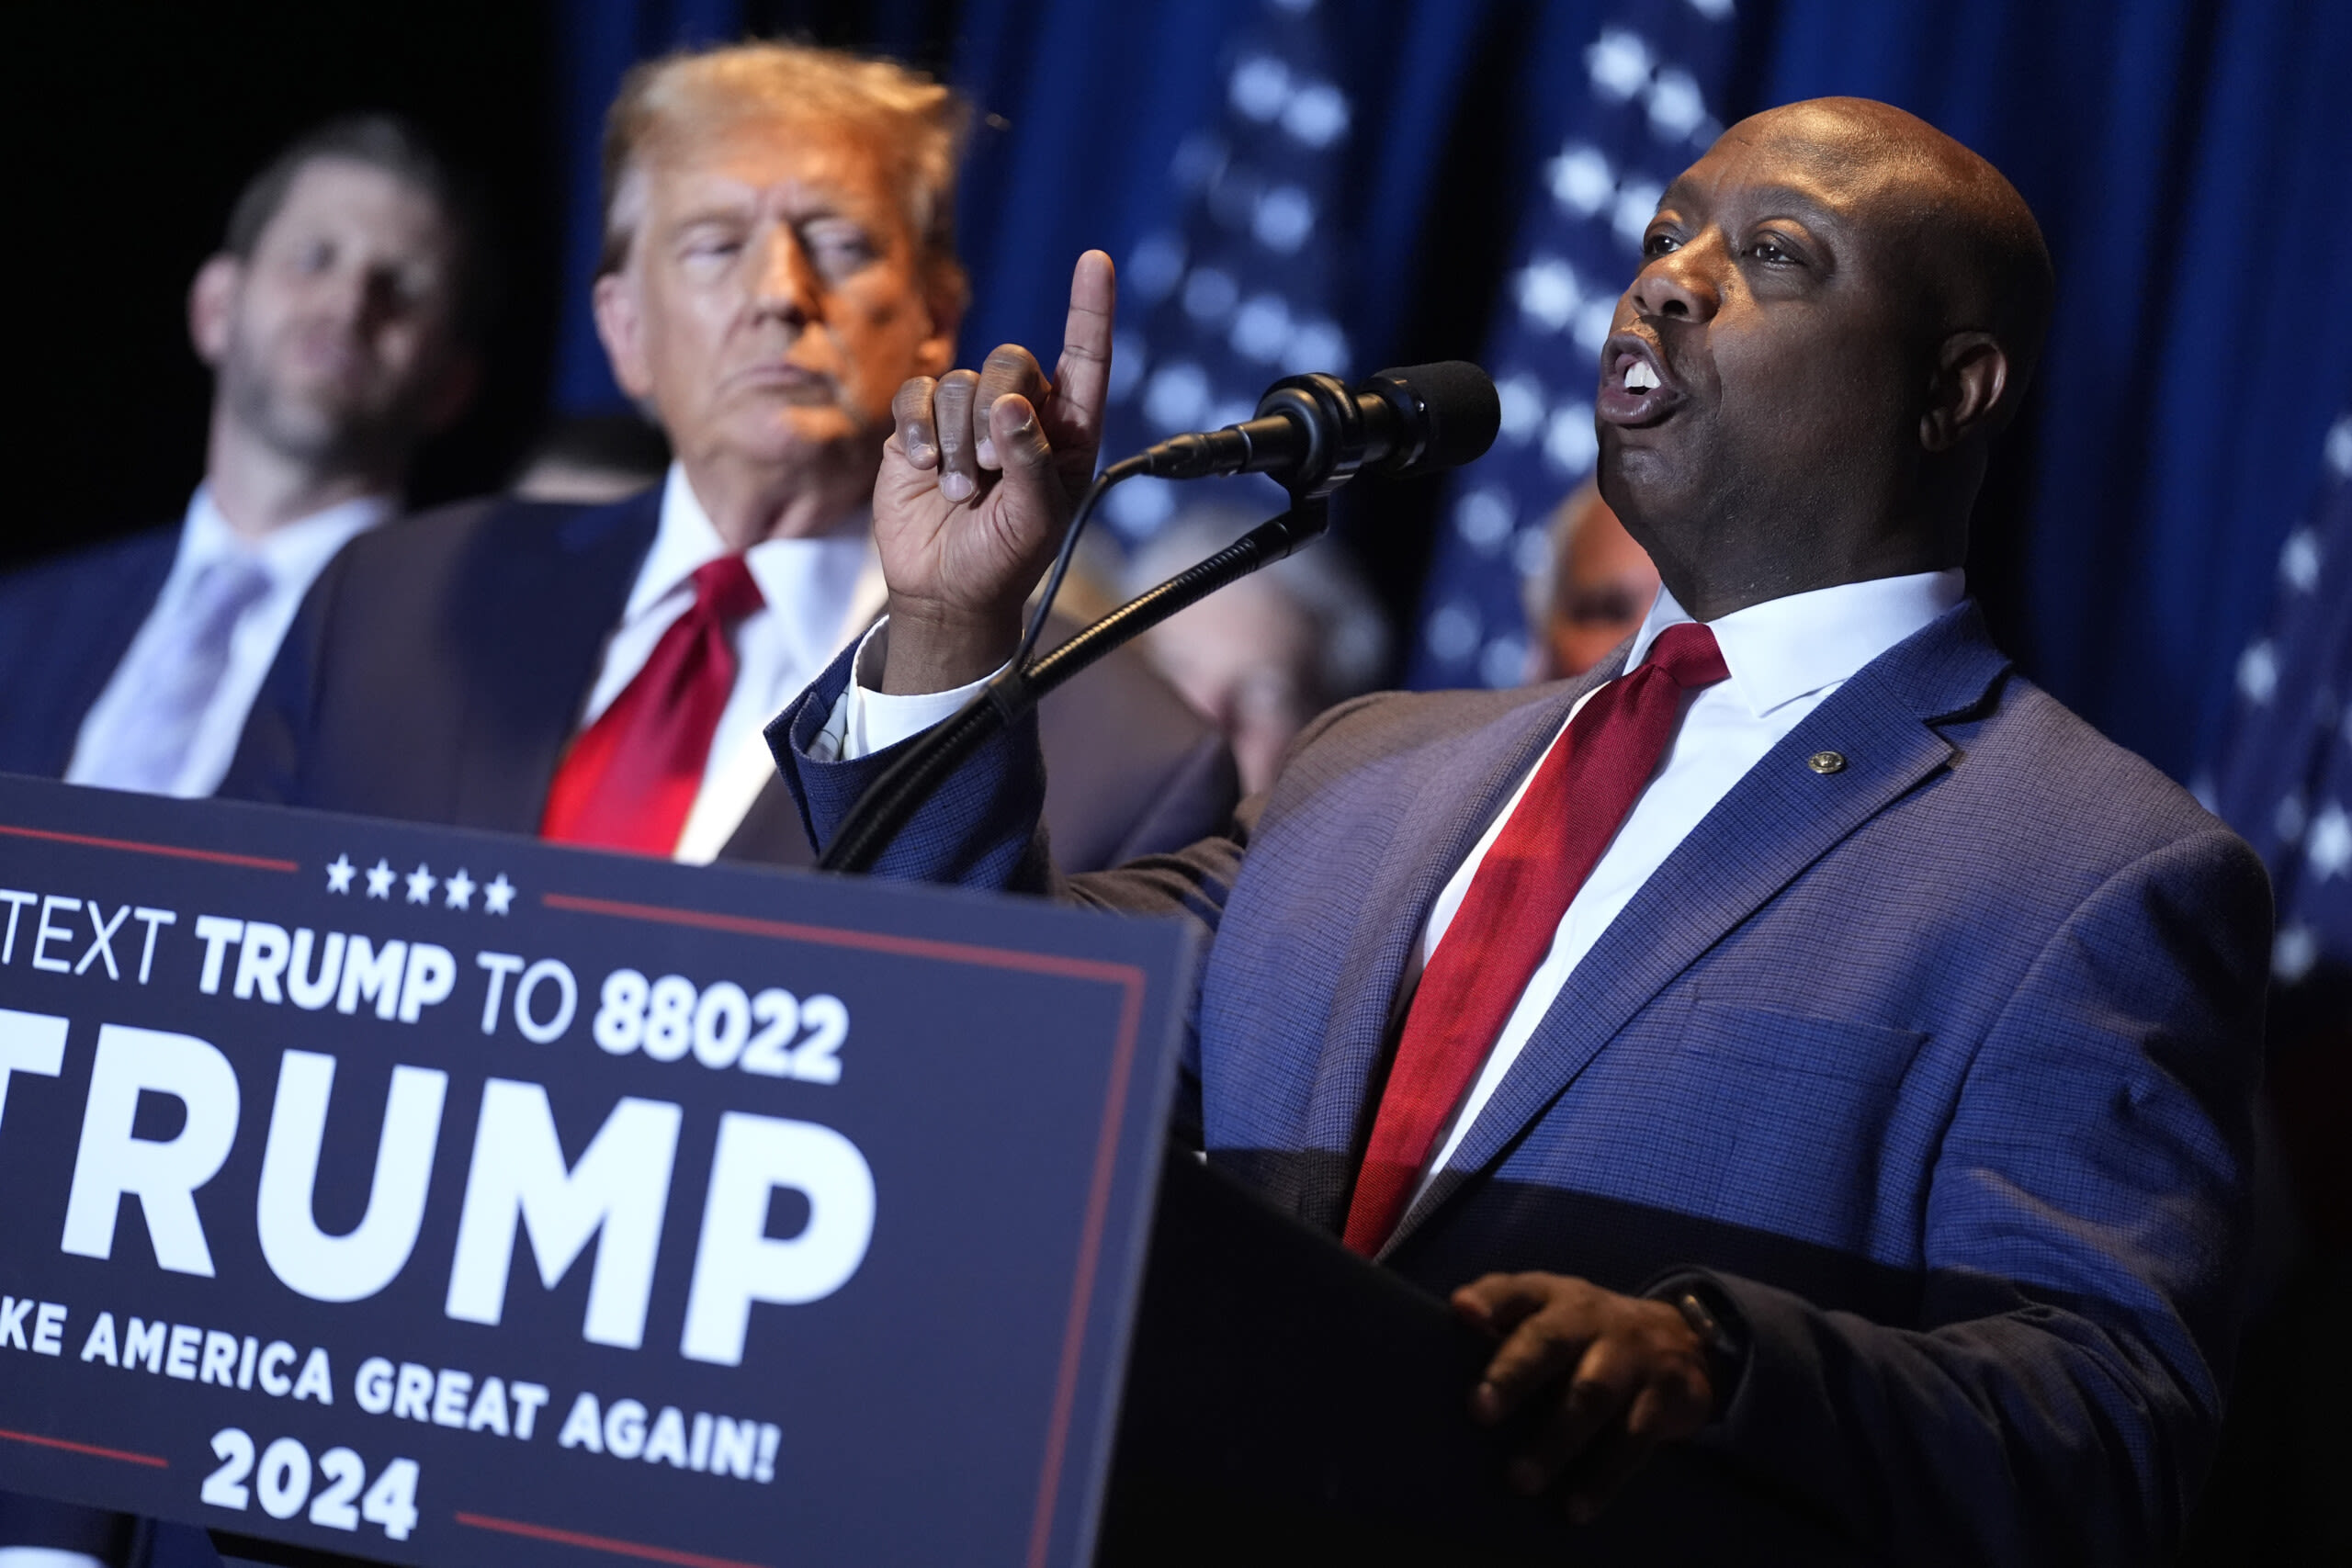 Tim Scott, a potential Trump VP pick, launches a $14 million outreach effort to minority voters - ABC Columbia